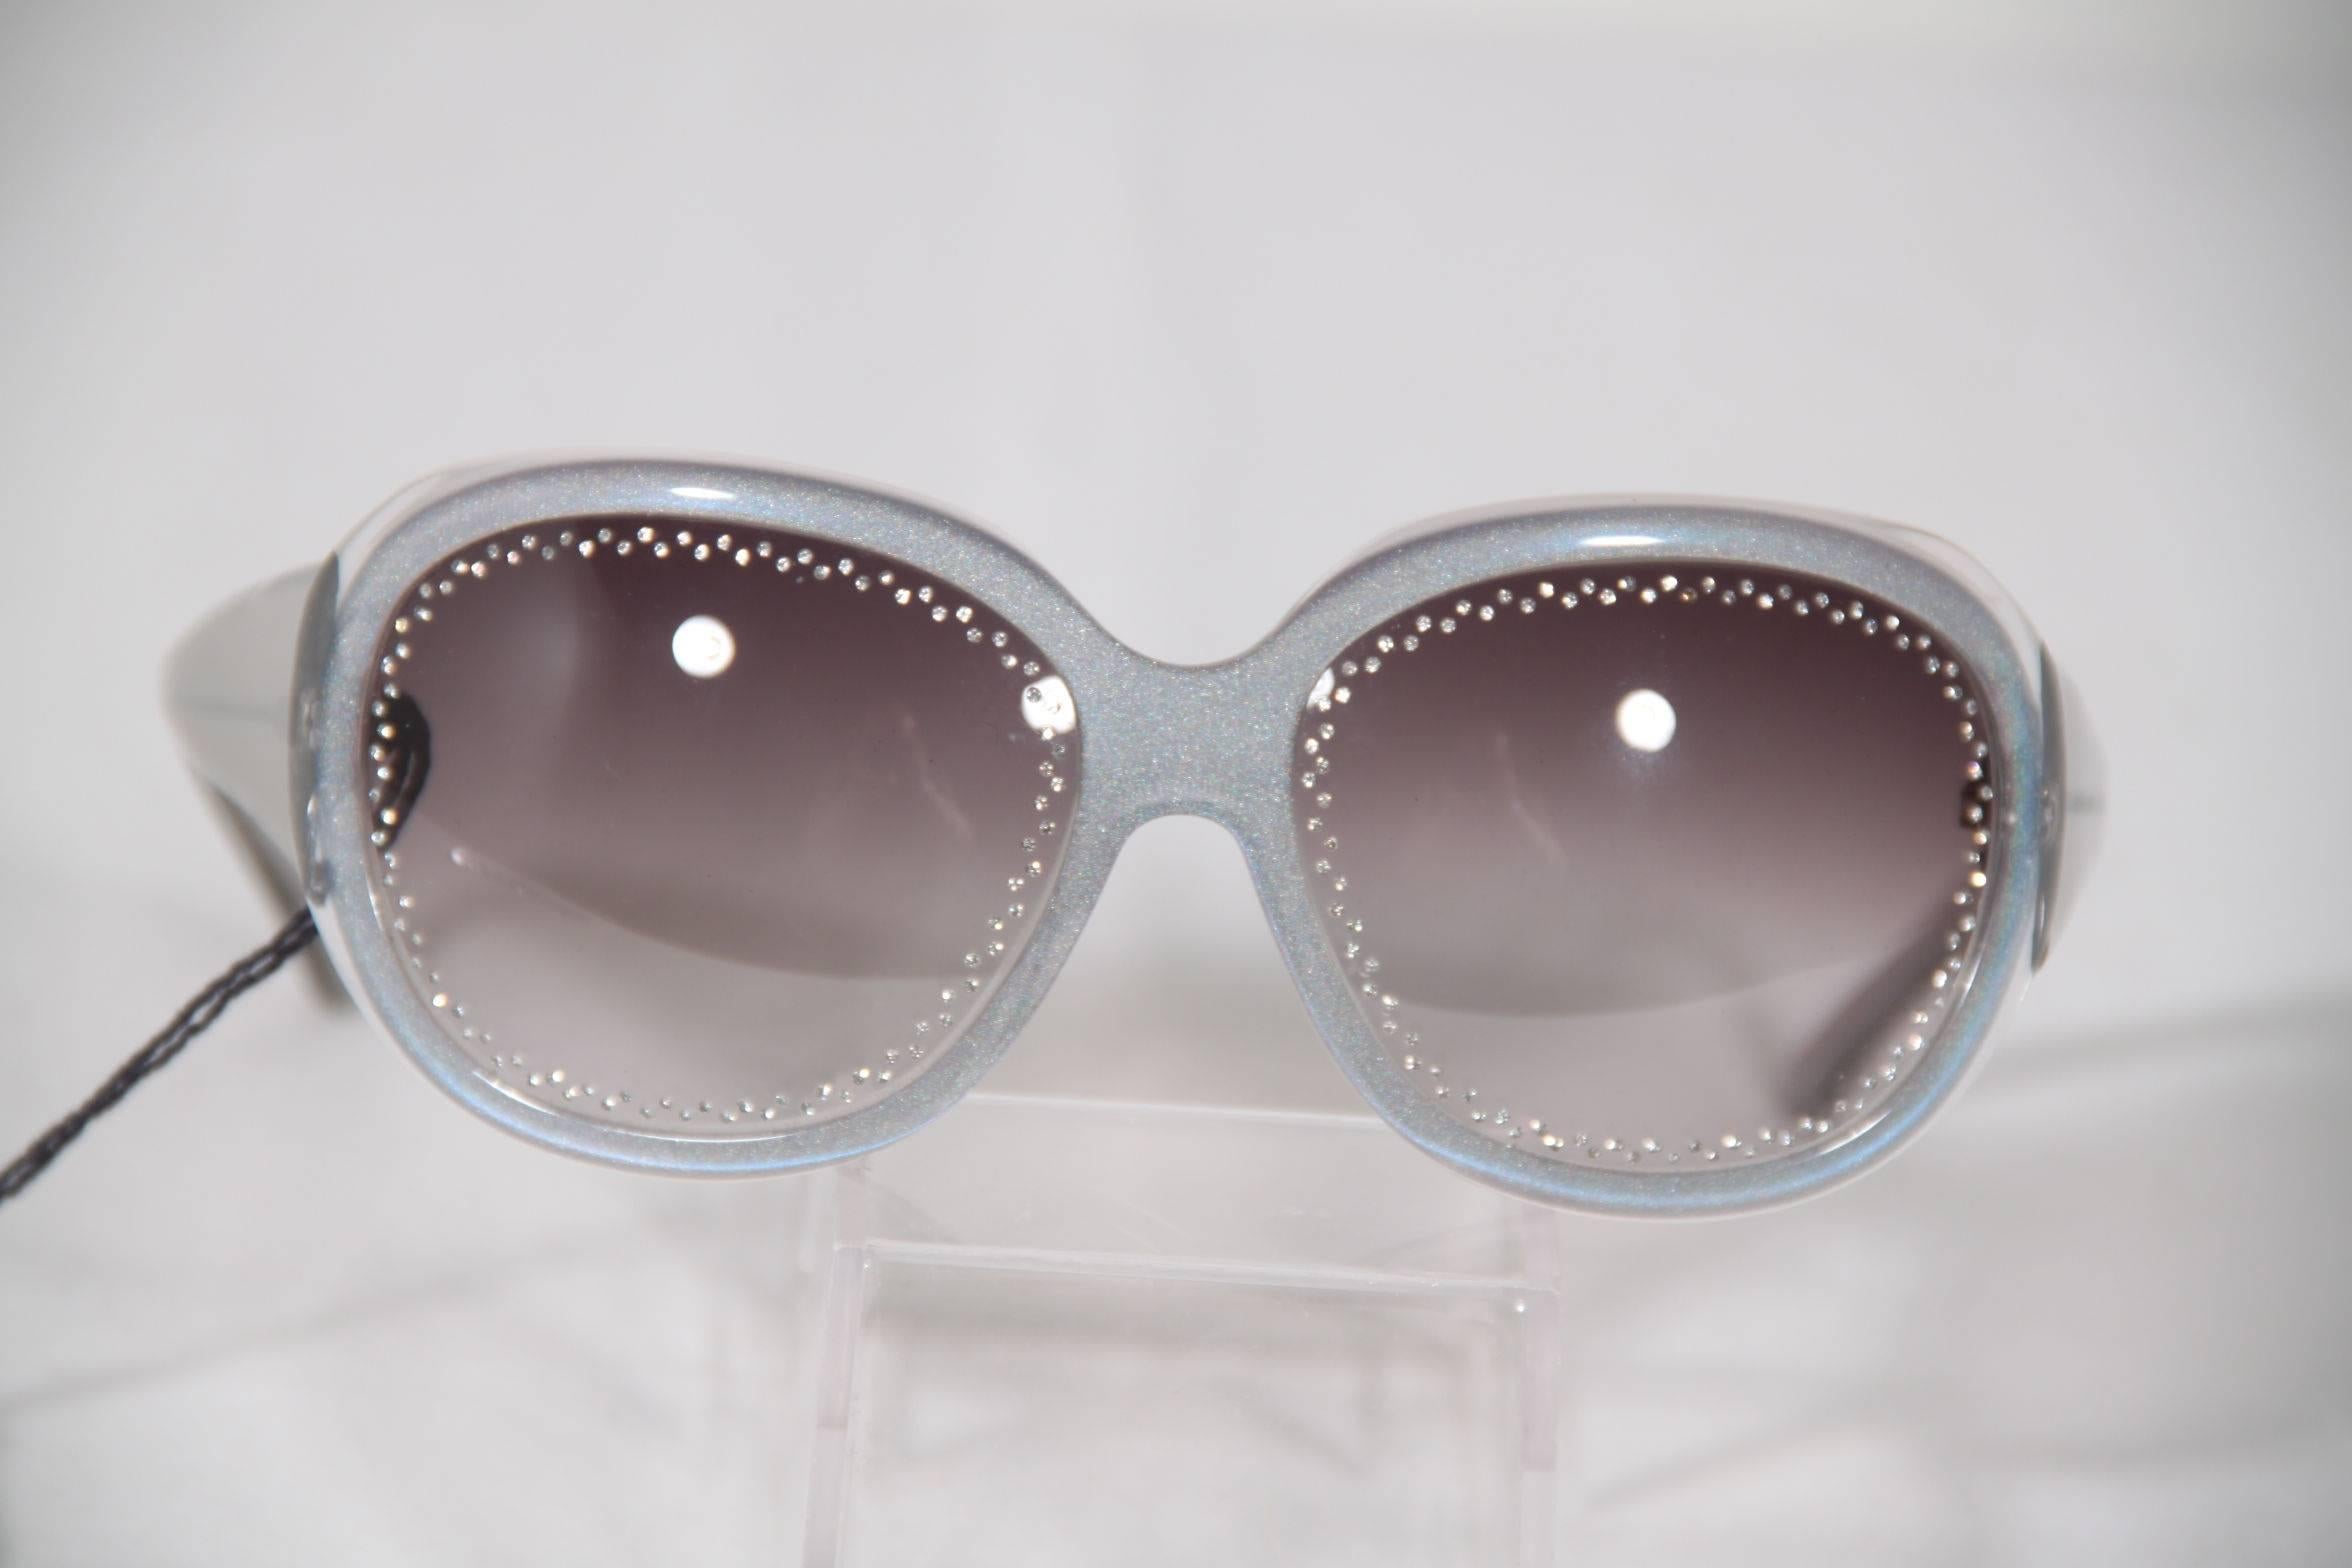 original 100% UV protection lenses with rhinestones border

Gradient/faded gradient lenses

Gray plastic oversized frame

Mod. FRIDA AD15092 D50 61/16 135

Frame made in Italy

Any other detail which is not mentioned may be seen on the